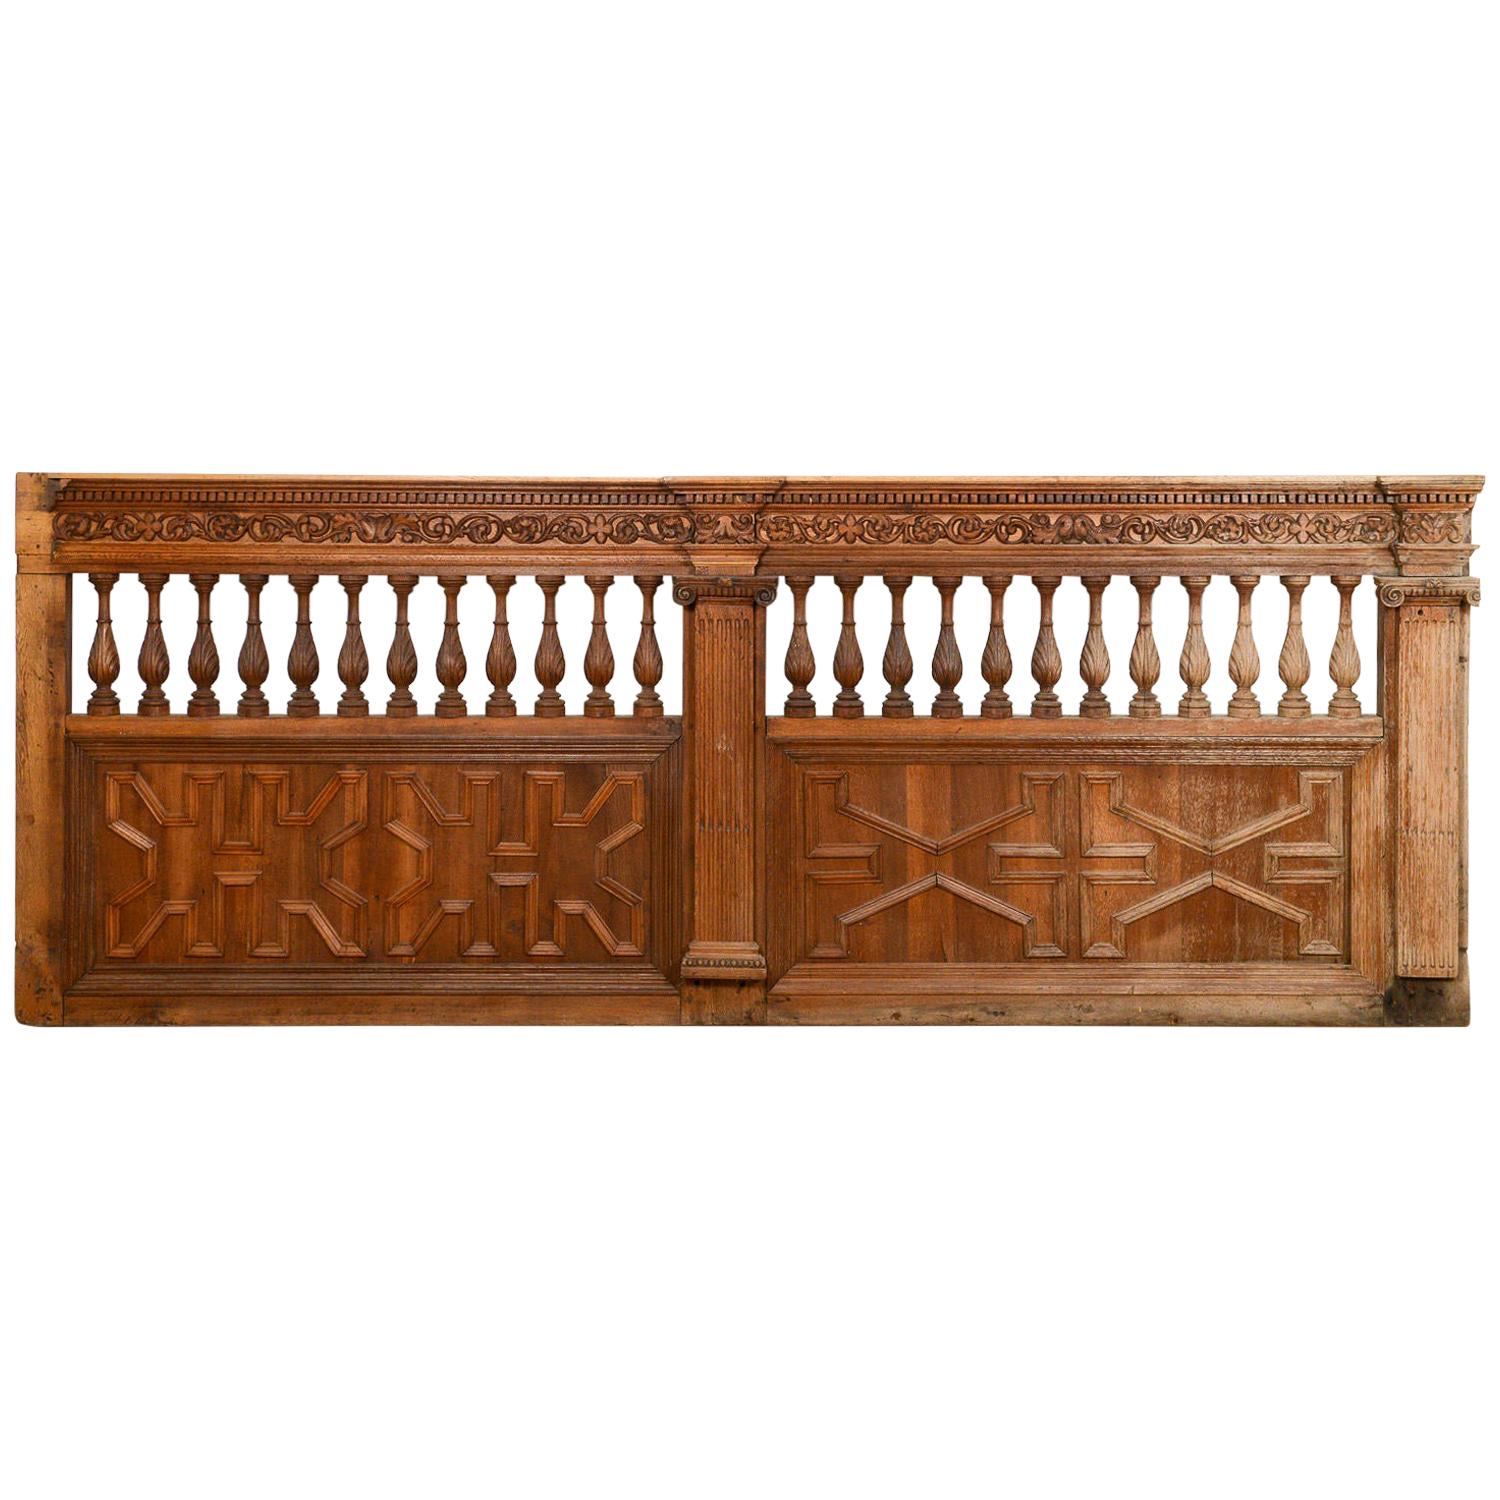 Carved Oak Panels with Ionic Pillars, 19th Century For Sale